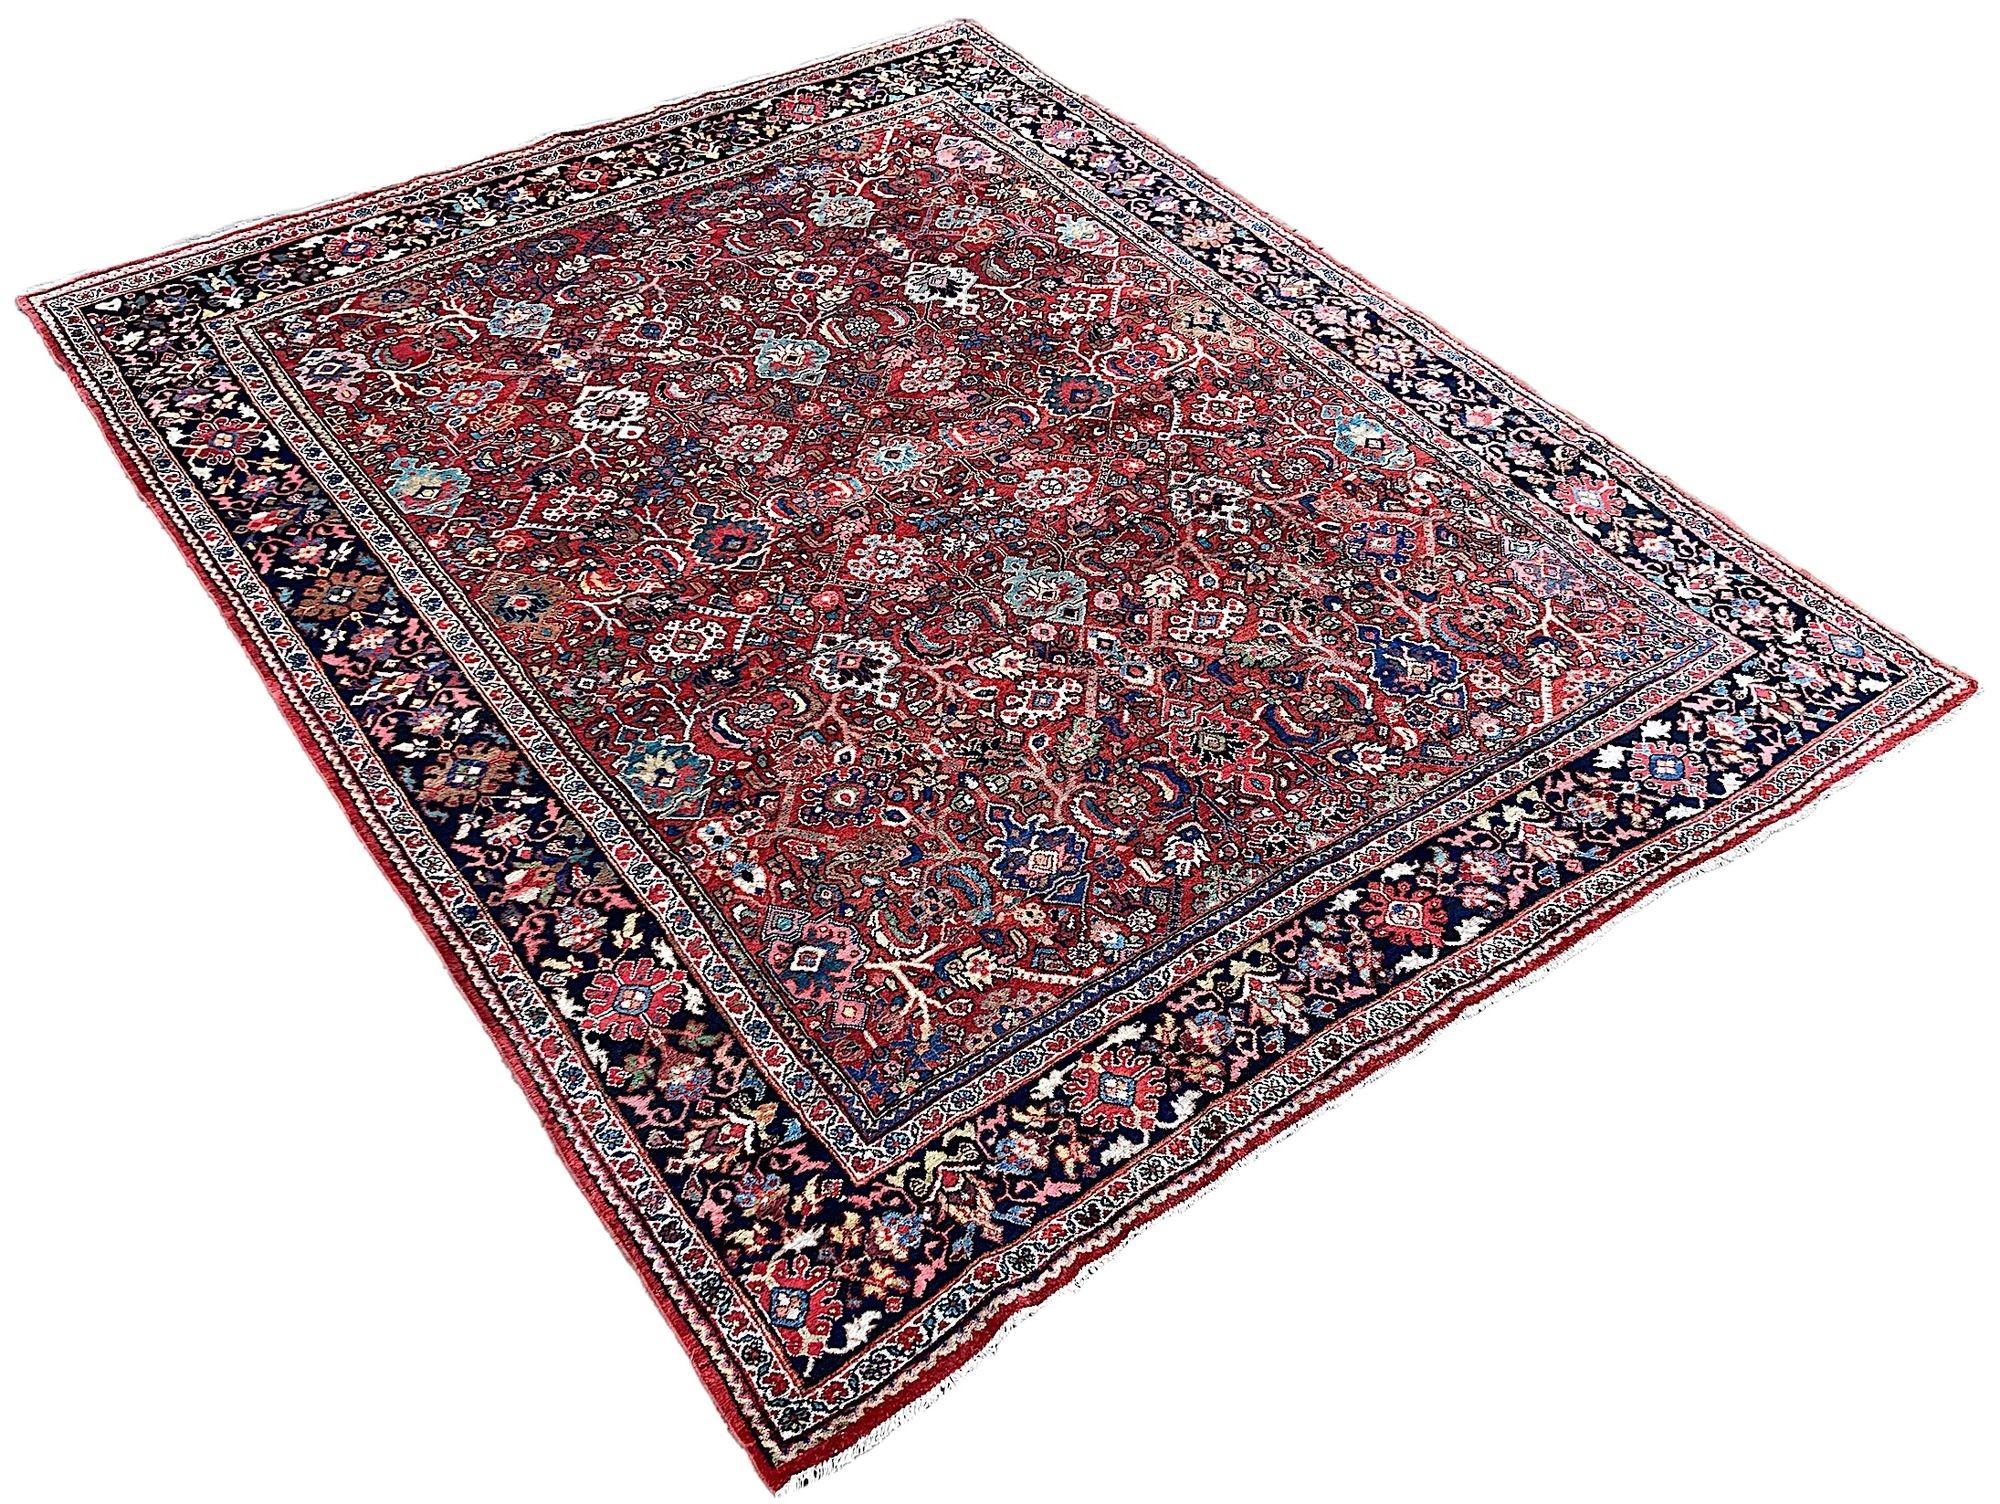 Antique Mahal Carpet 3.63m x 2.81m In Good Condition For Sale In St. Albans, GB